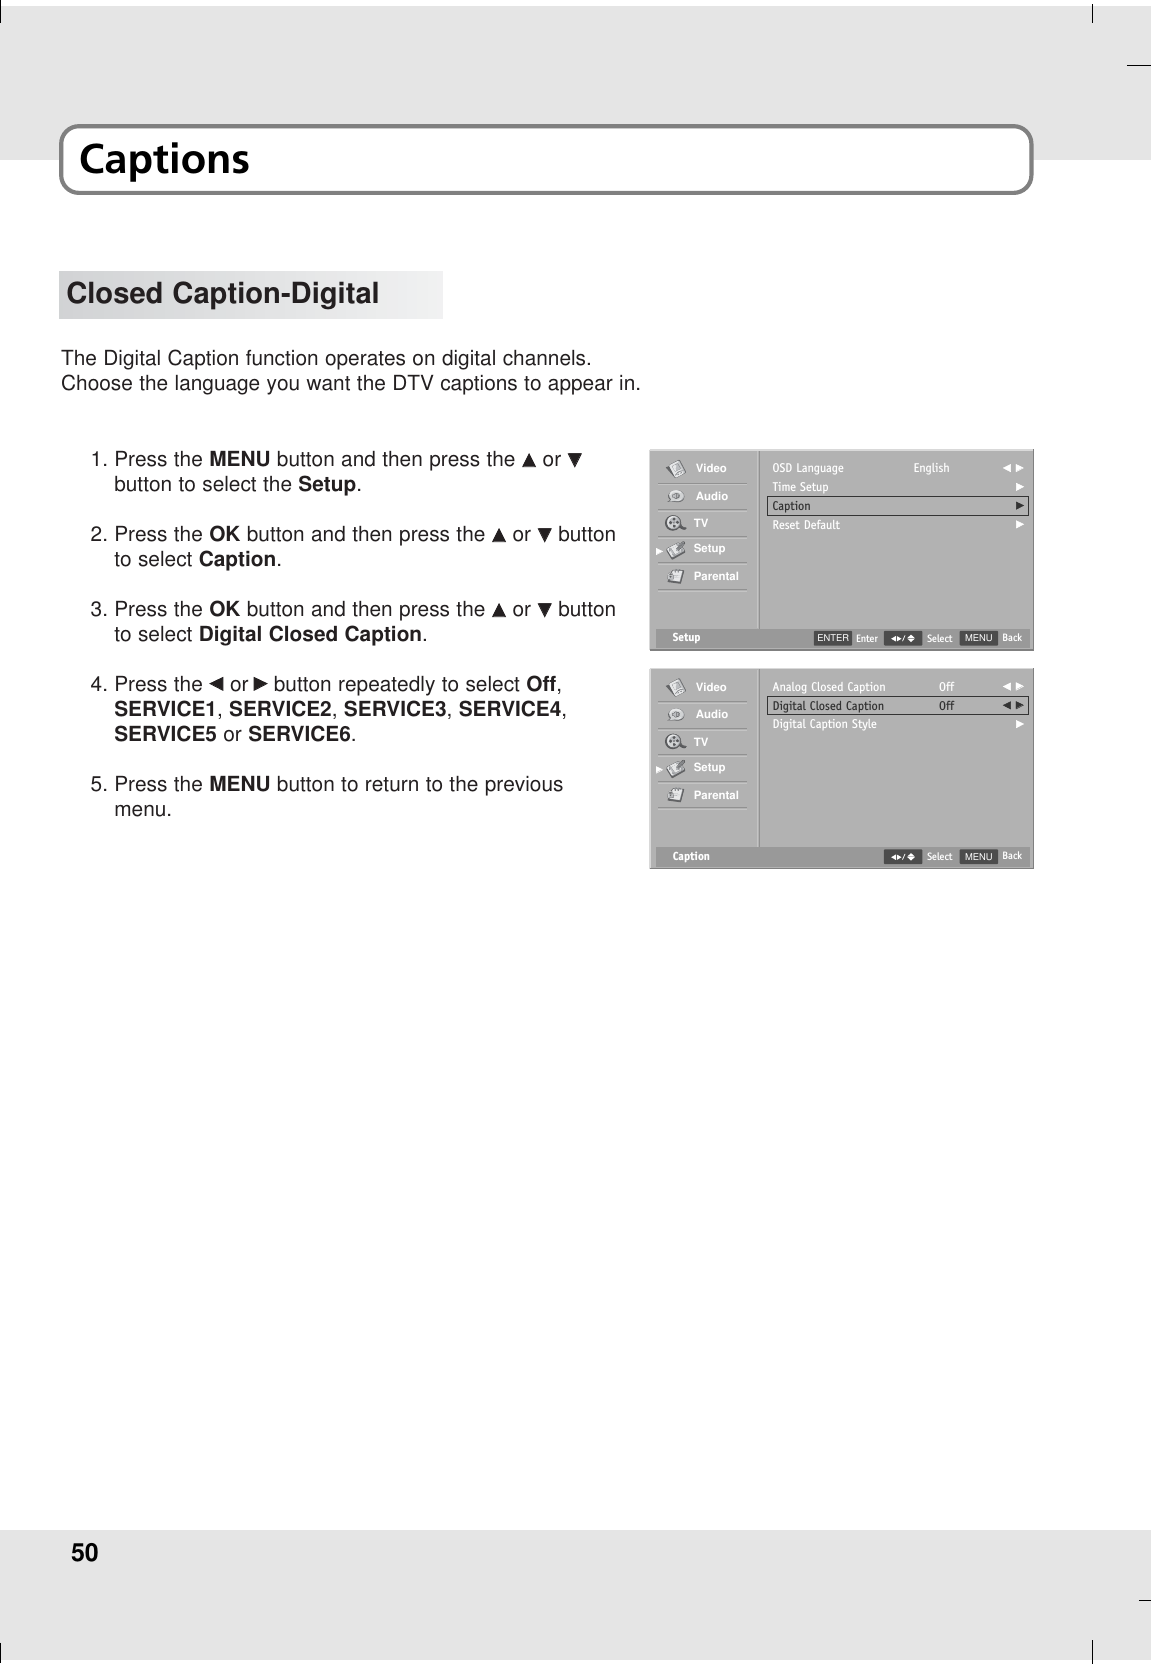 50Closed Caption-DigitalThe Digital Caption function operates on digital channels. Choose the language you want the DTV captions to appear in.1. Press the MENU button and then press the DDor EEbutton to select the Setup.2. Press the OK button and then press the DDor EEbuttonto select Caption.3. Press the OK button and then press the DDor EEbuttonto select Digital Closed Caption.4. Press the FFor GGbutton repeatedly to select Off,SERVICE1,SERVICE2, SERVICE3,SERVICE4,SERVICE5 or SERVICE6.5. Press the MENU button to return to the previousmenu.Setup MENU BackSelectOSD LanguageTime SetupCaptionReset DefaultEnglish F GGGGGVideoAudioTVSetupParentalGGCaption MENU BackSelectAnalog Closed CaptionDigital Closed CaptionDigital Caption StyleOffOffF GGF GGGVideoAudioTVSetupParentalGGENTER EnterCaptions